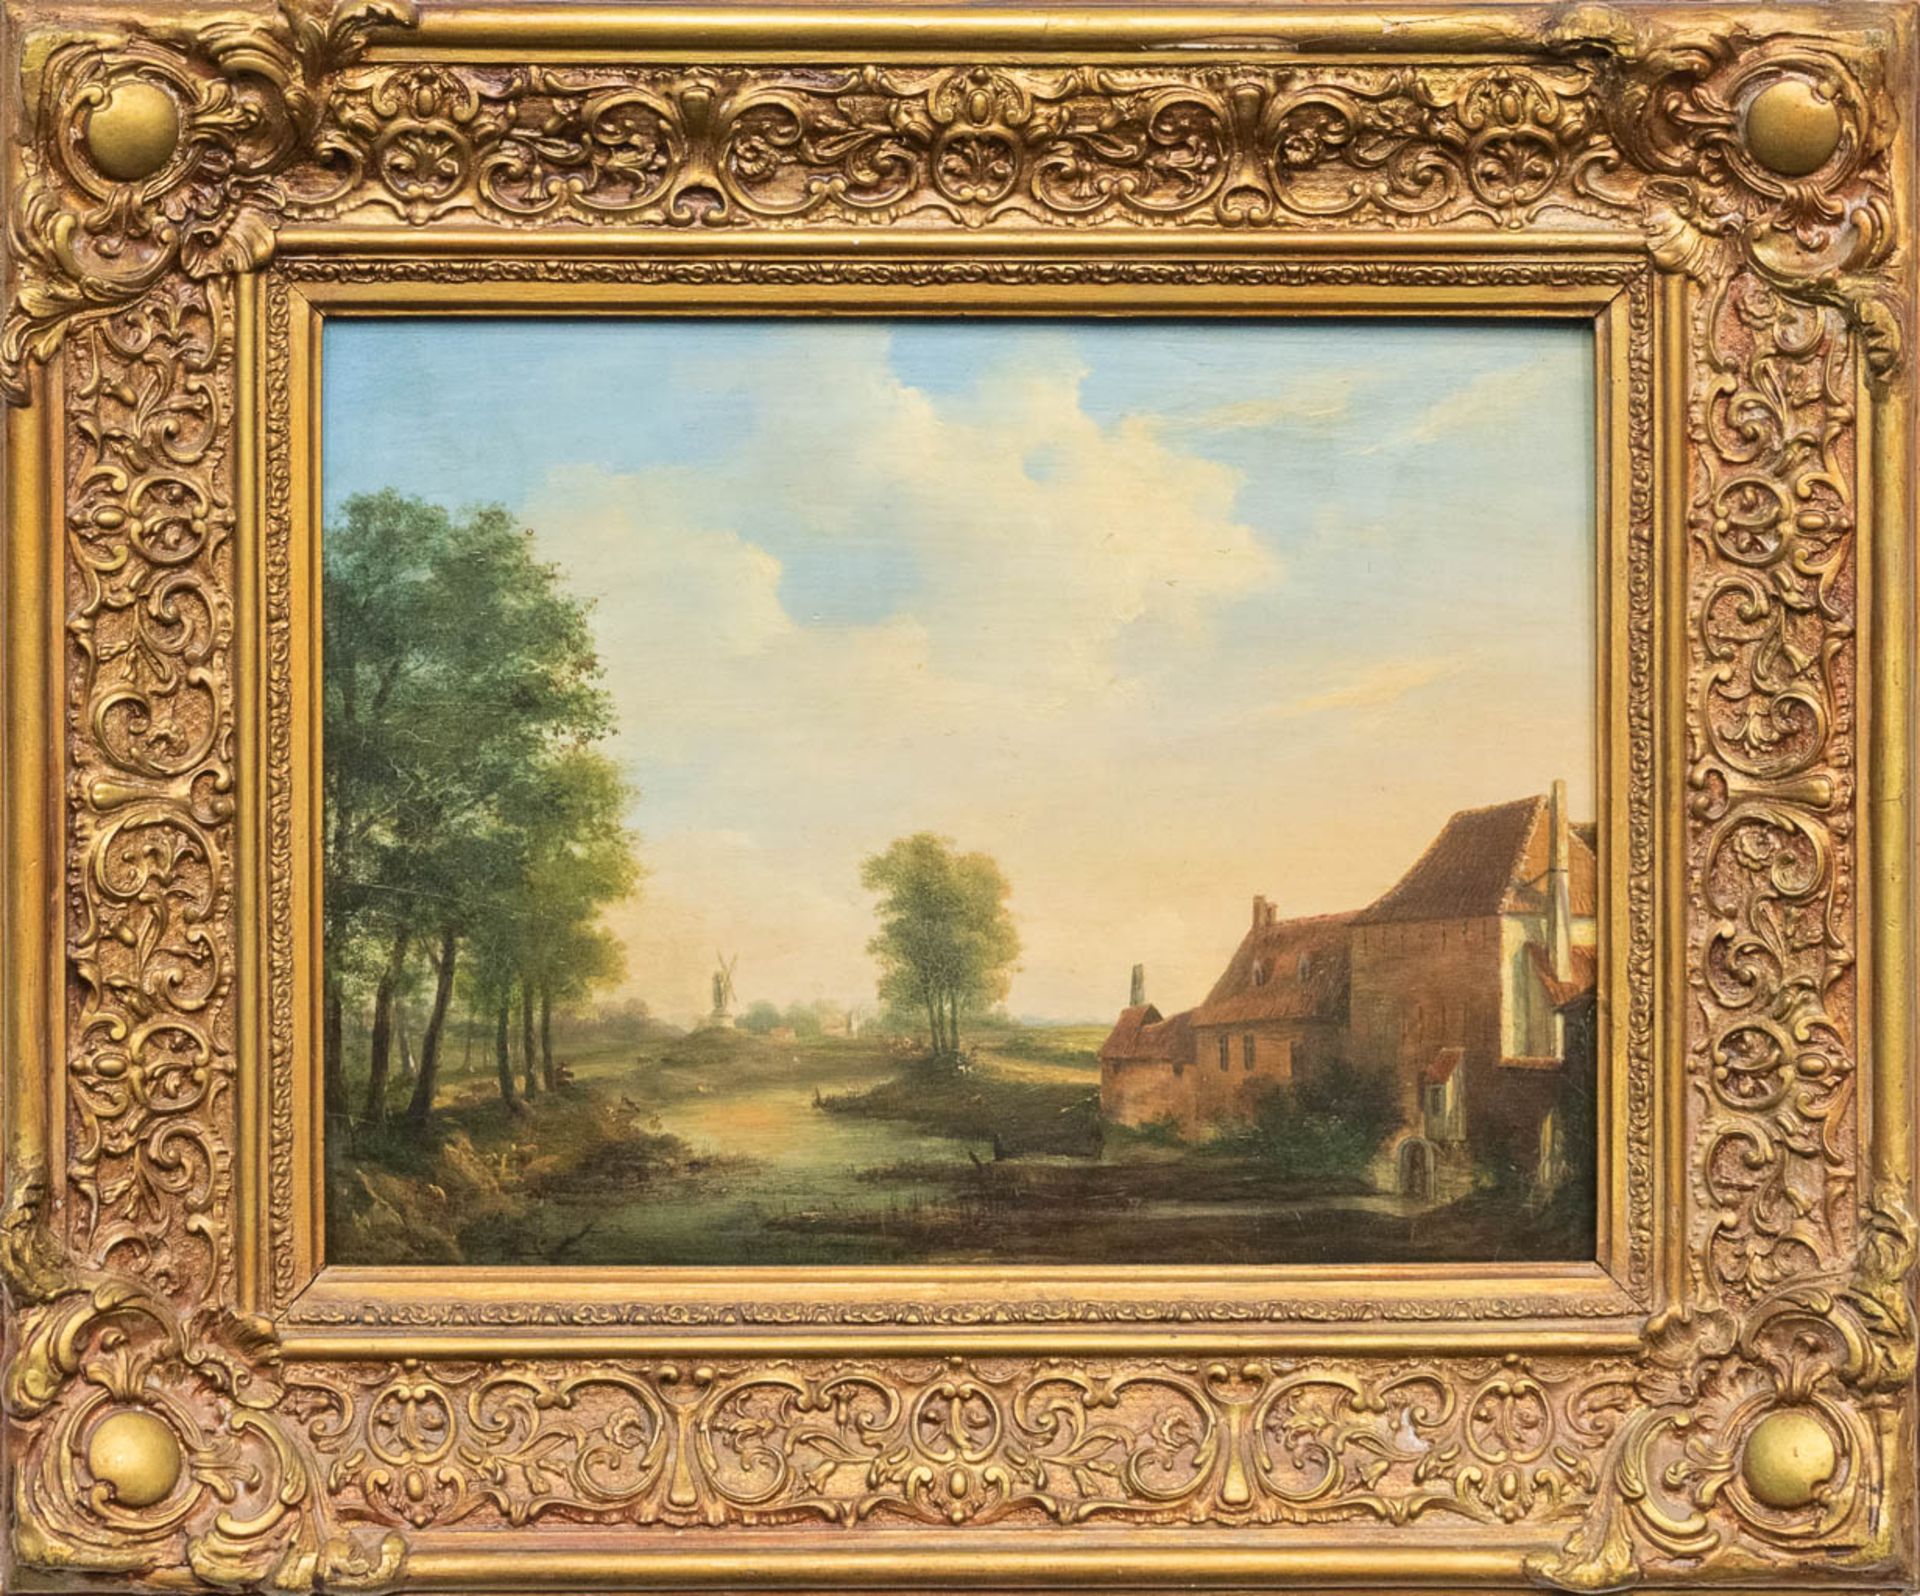 No signature found, an antique painting of The Dutch School, landscape with windmill, oil on canvas. - Image 2 of 5